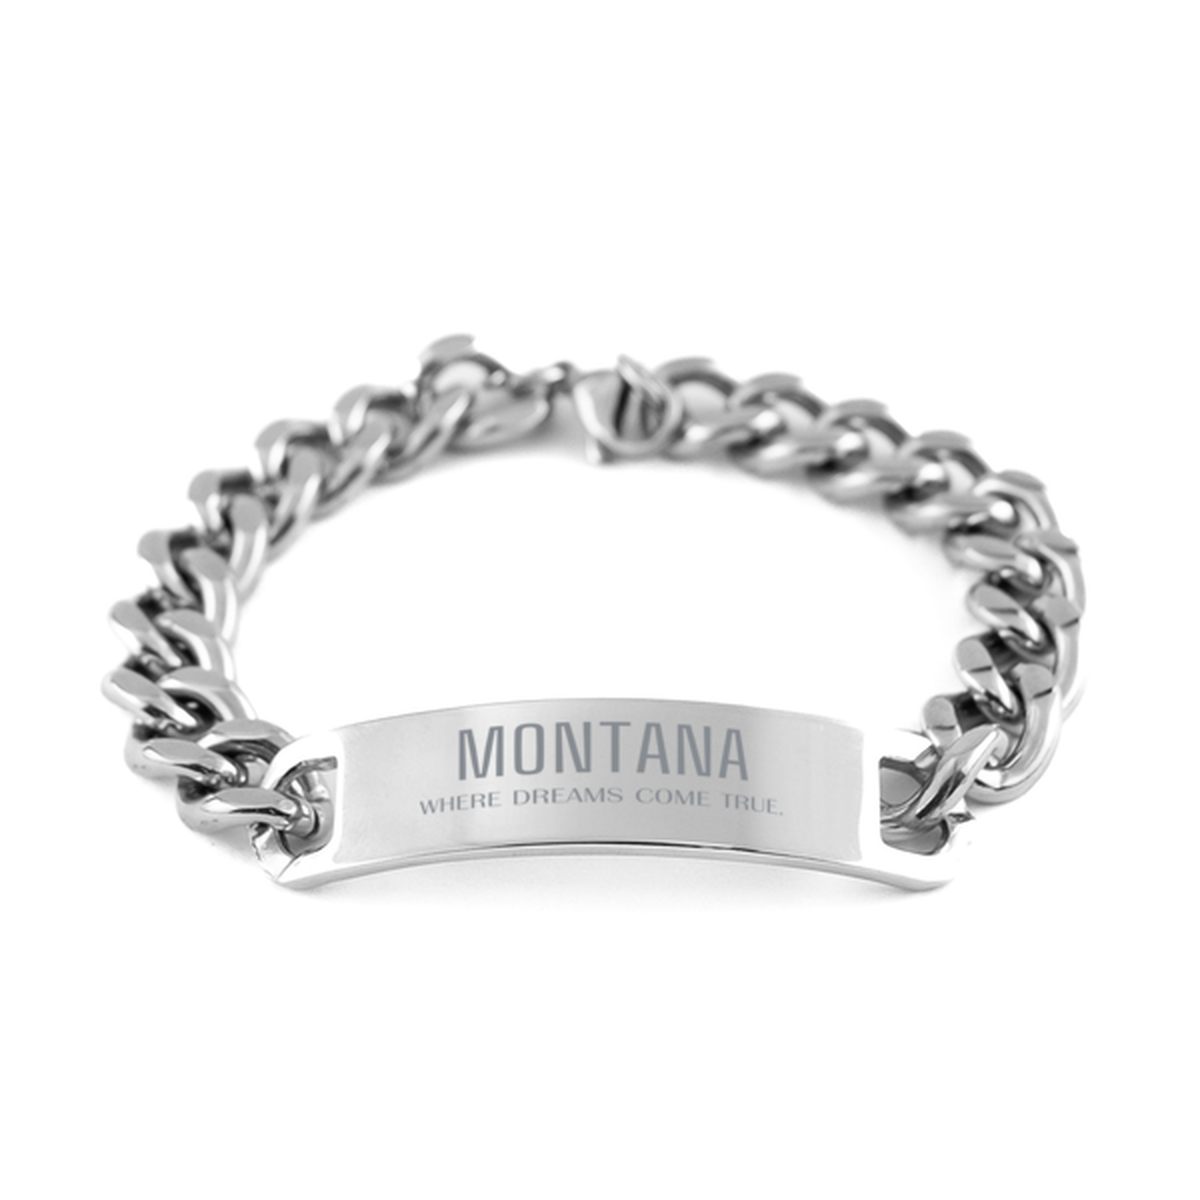 Love Montana State Cuban Chain Stainless Steel Bracelet, Montana Where dreams come true, Birthday Inspirational Gifts For Montana Men, Women, Friends